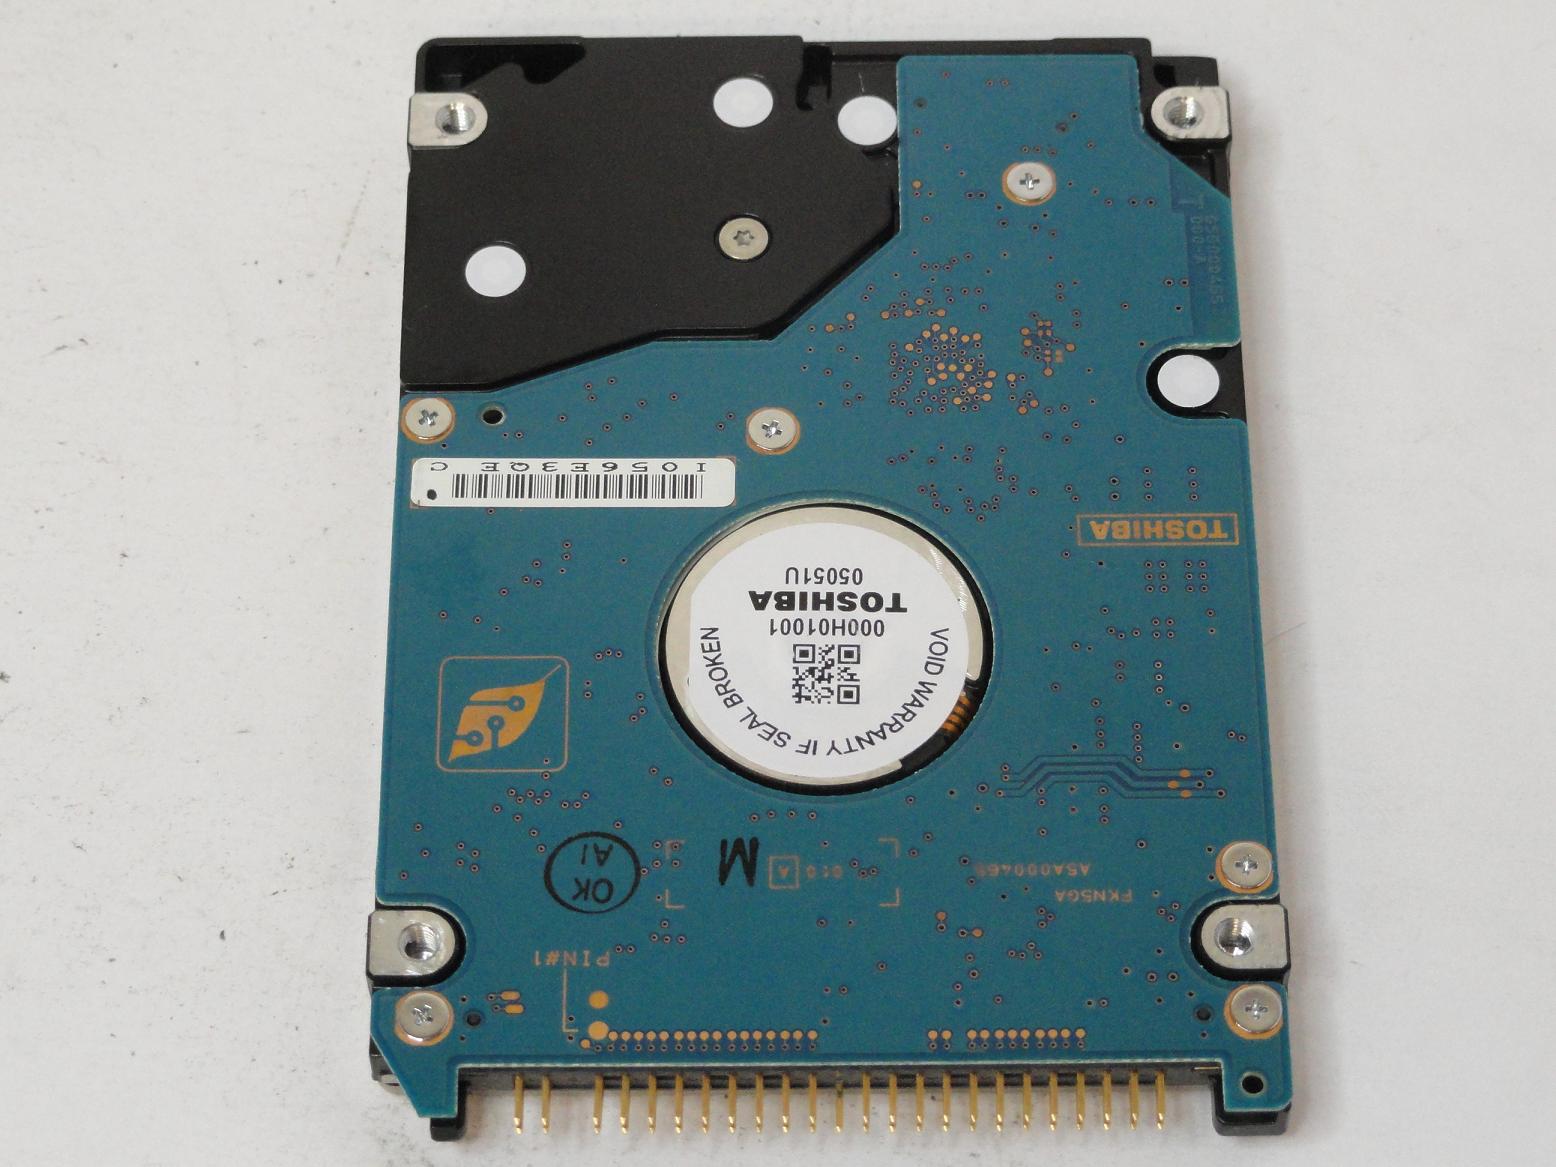 MC6420_HDD2191_Toshiba 80GB IDE 5400rpm 2.5in HDD - Image2